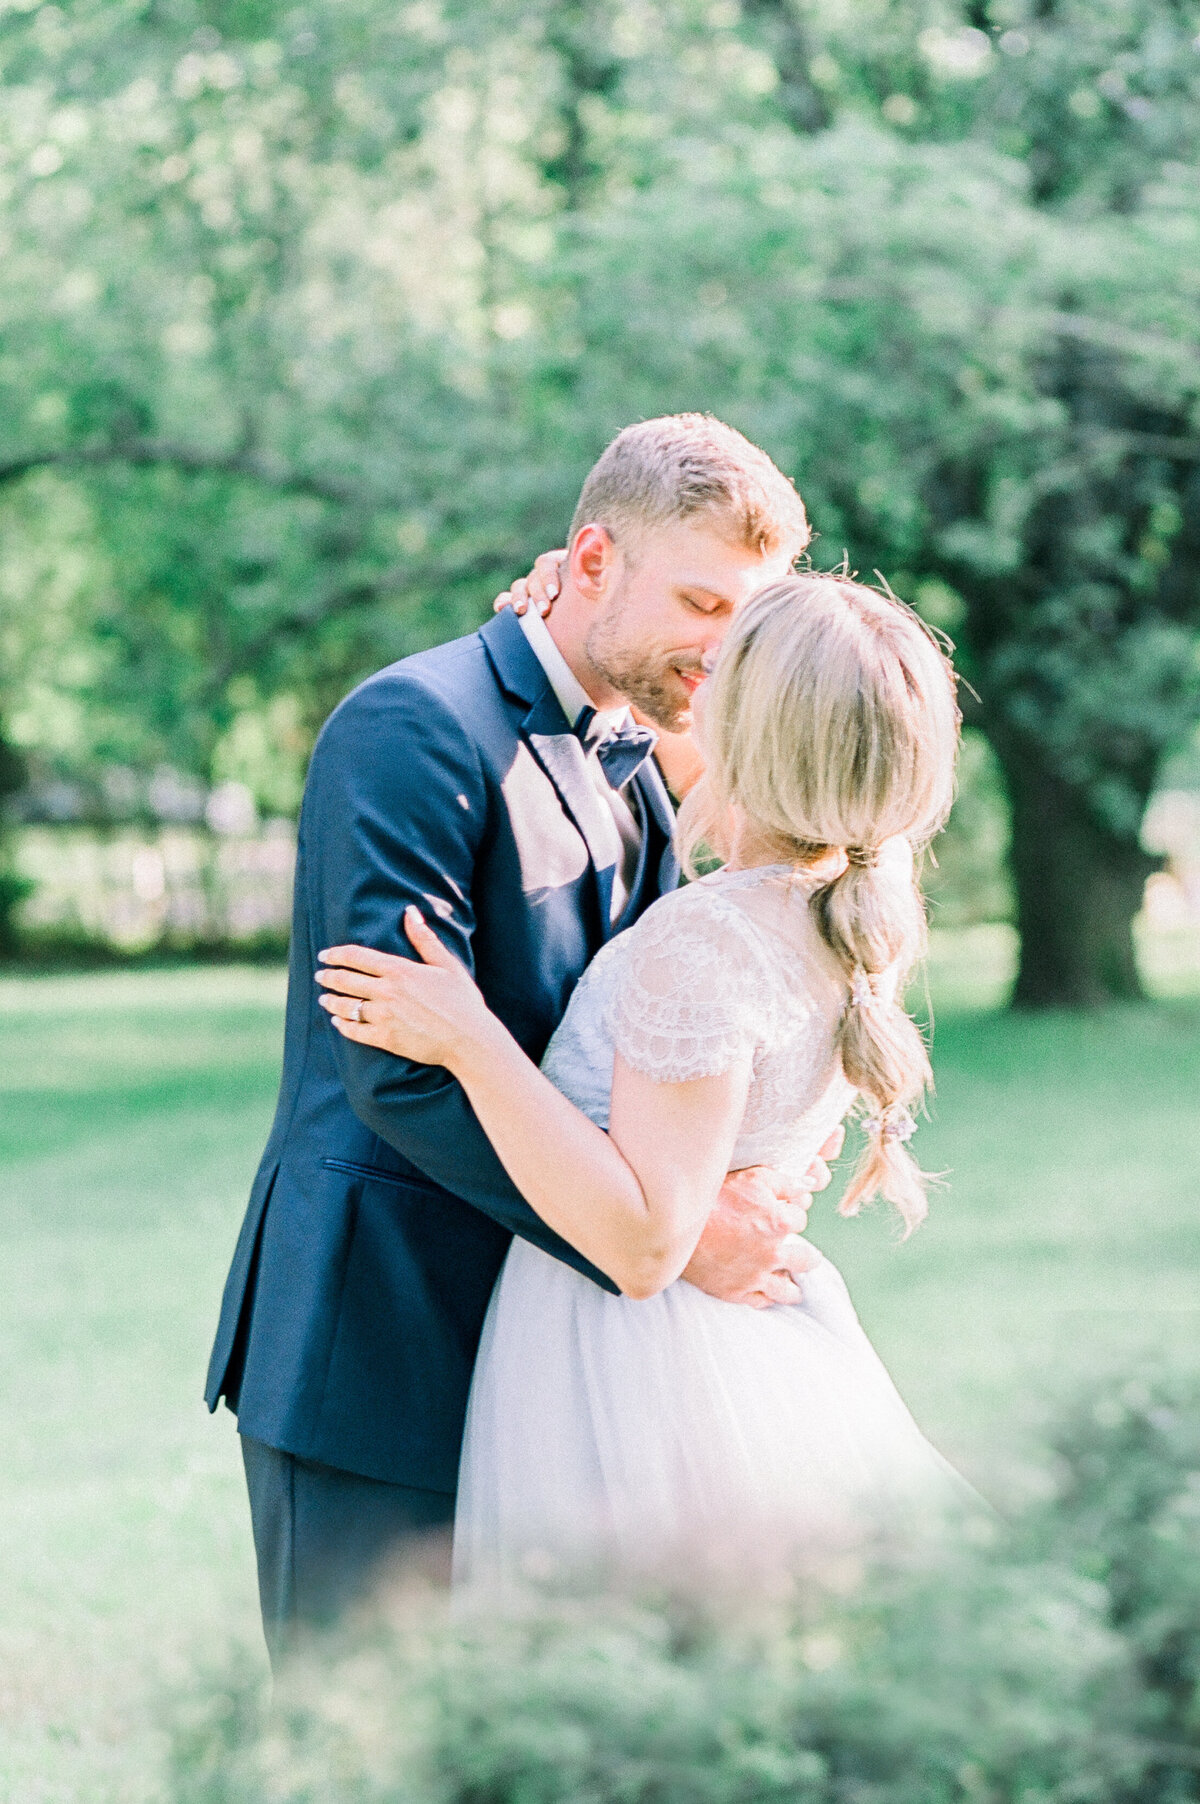 light and airy wedding photographer in michigan